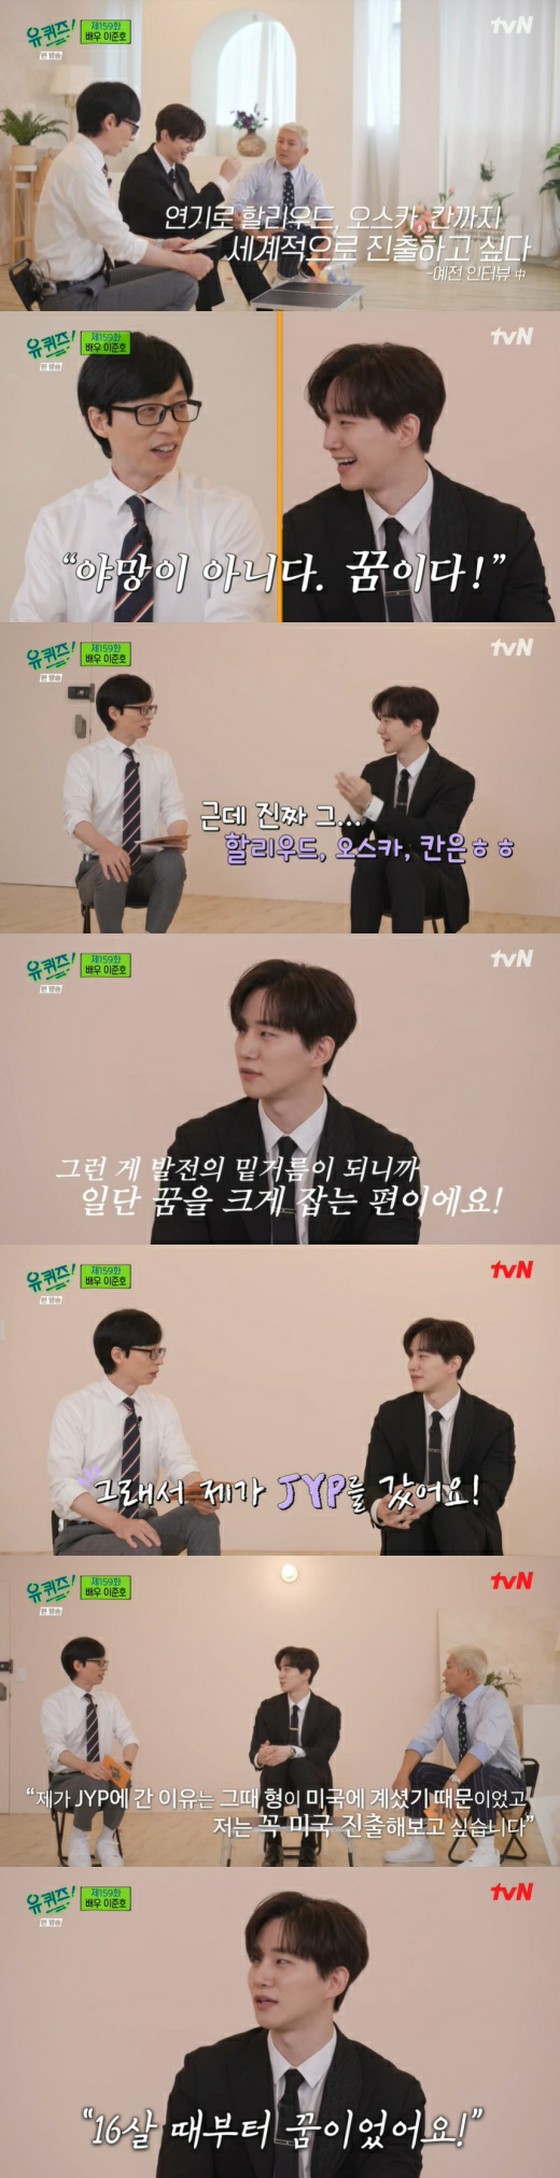 JUNHO (2PM), Ambitious JUNHO's dream is Hollywood ... "JYP dreaming of expanding into the United States" = "You Quiz ON THE BLOCK"